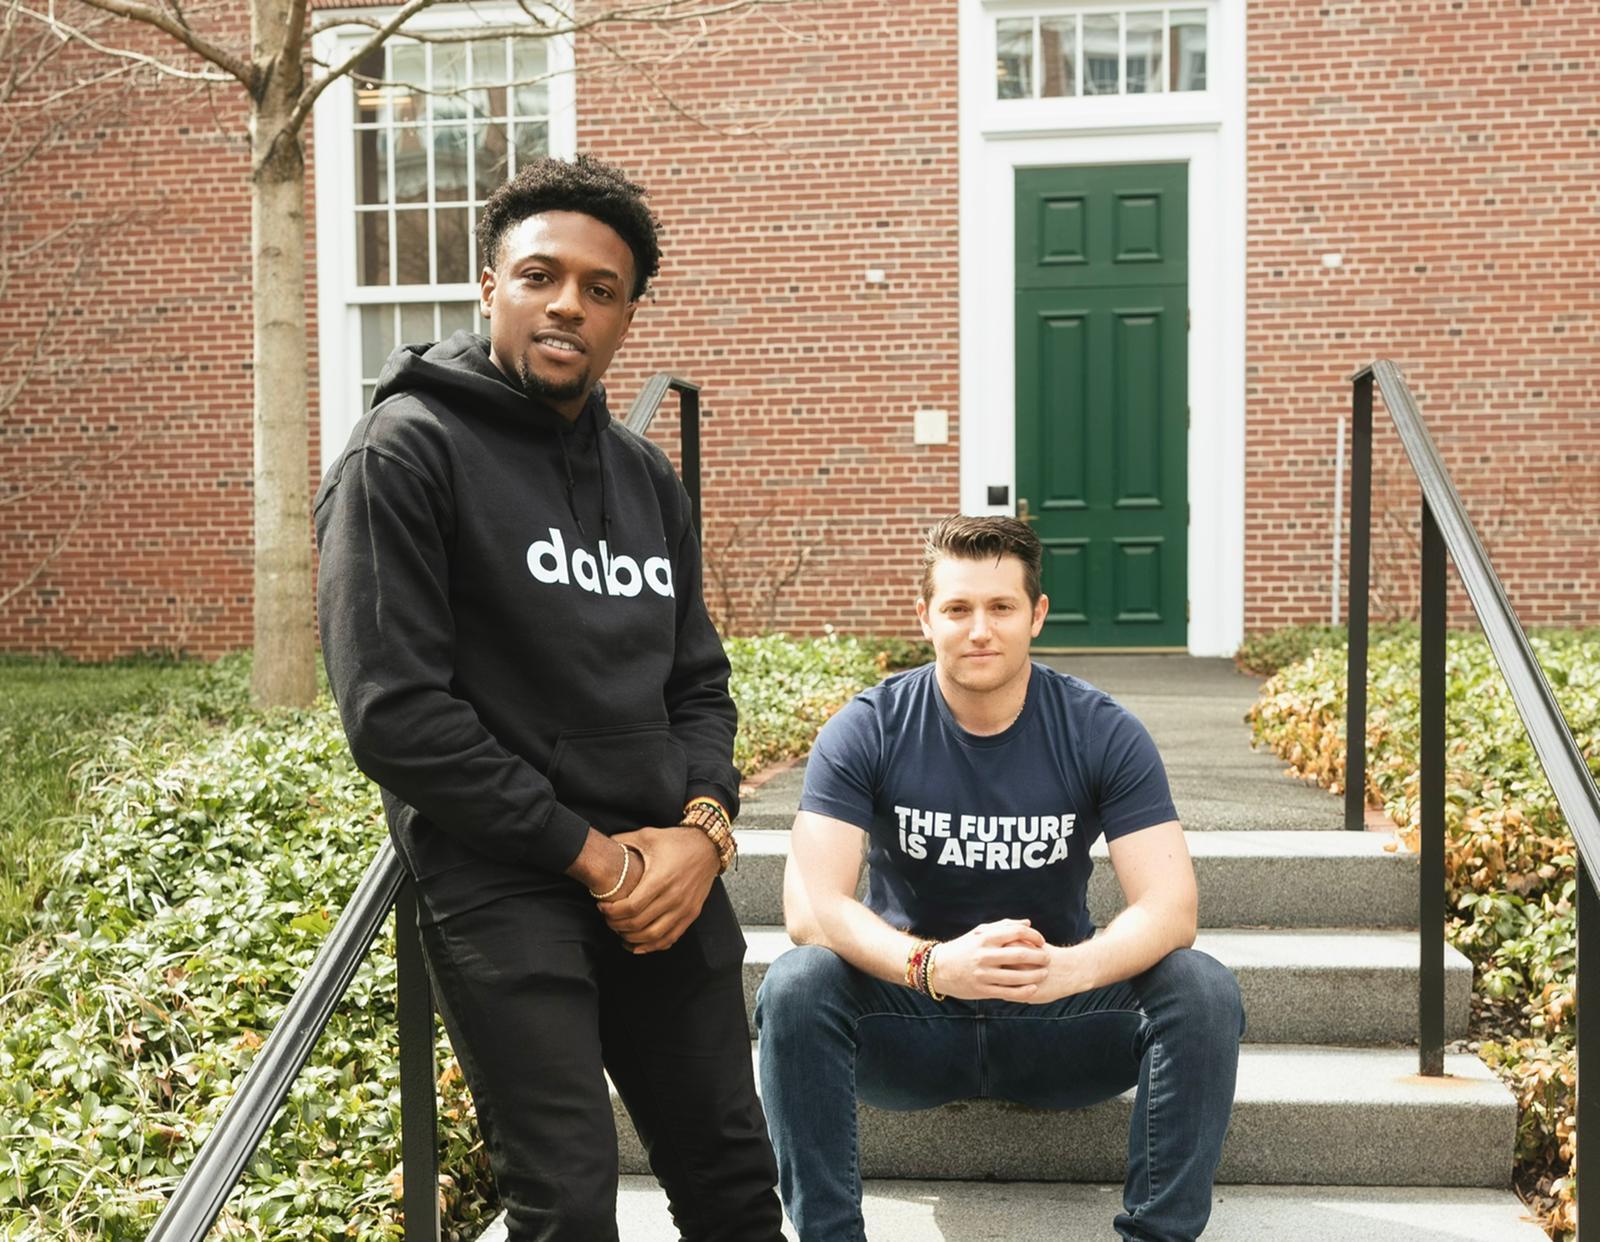 Boum III Jr (left) and Anthony Miclet, co-founders of daba. Image credit: Supplied.